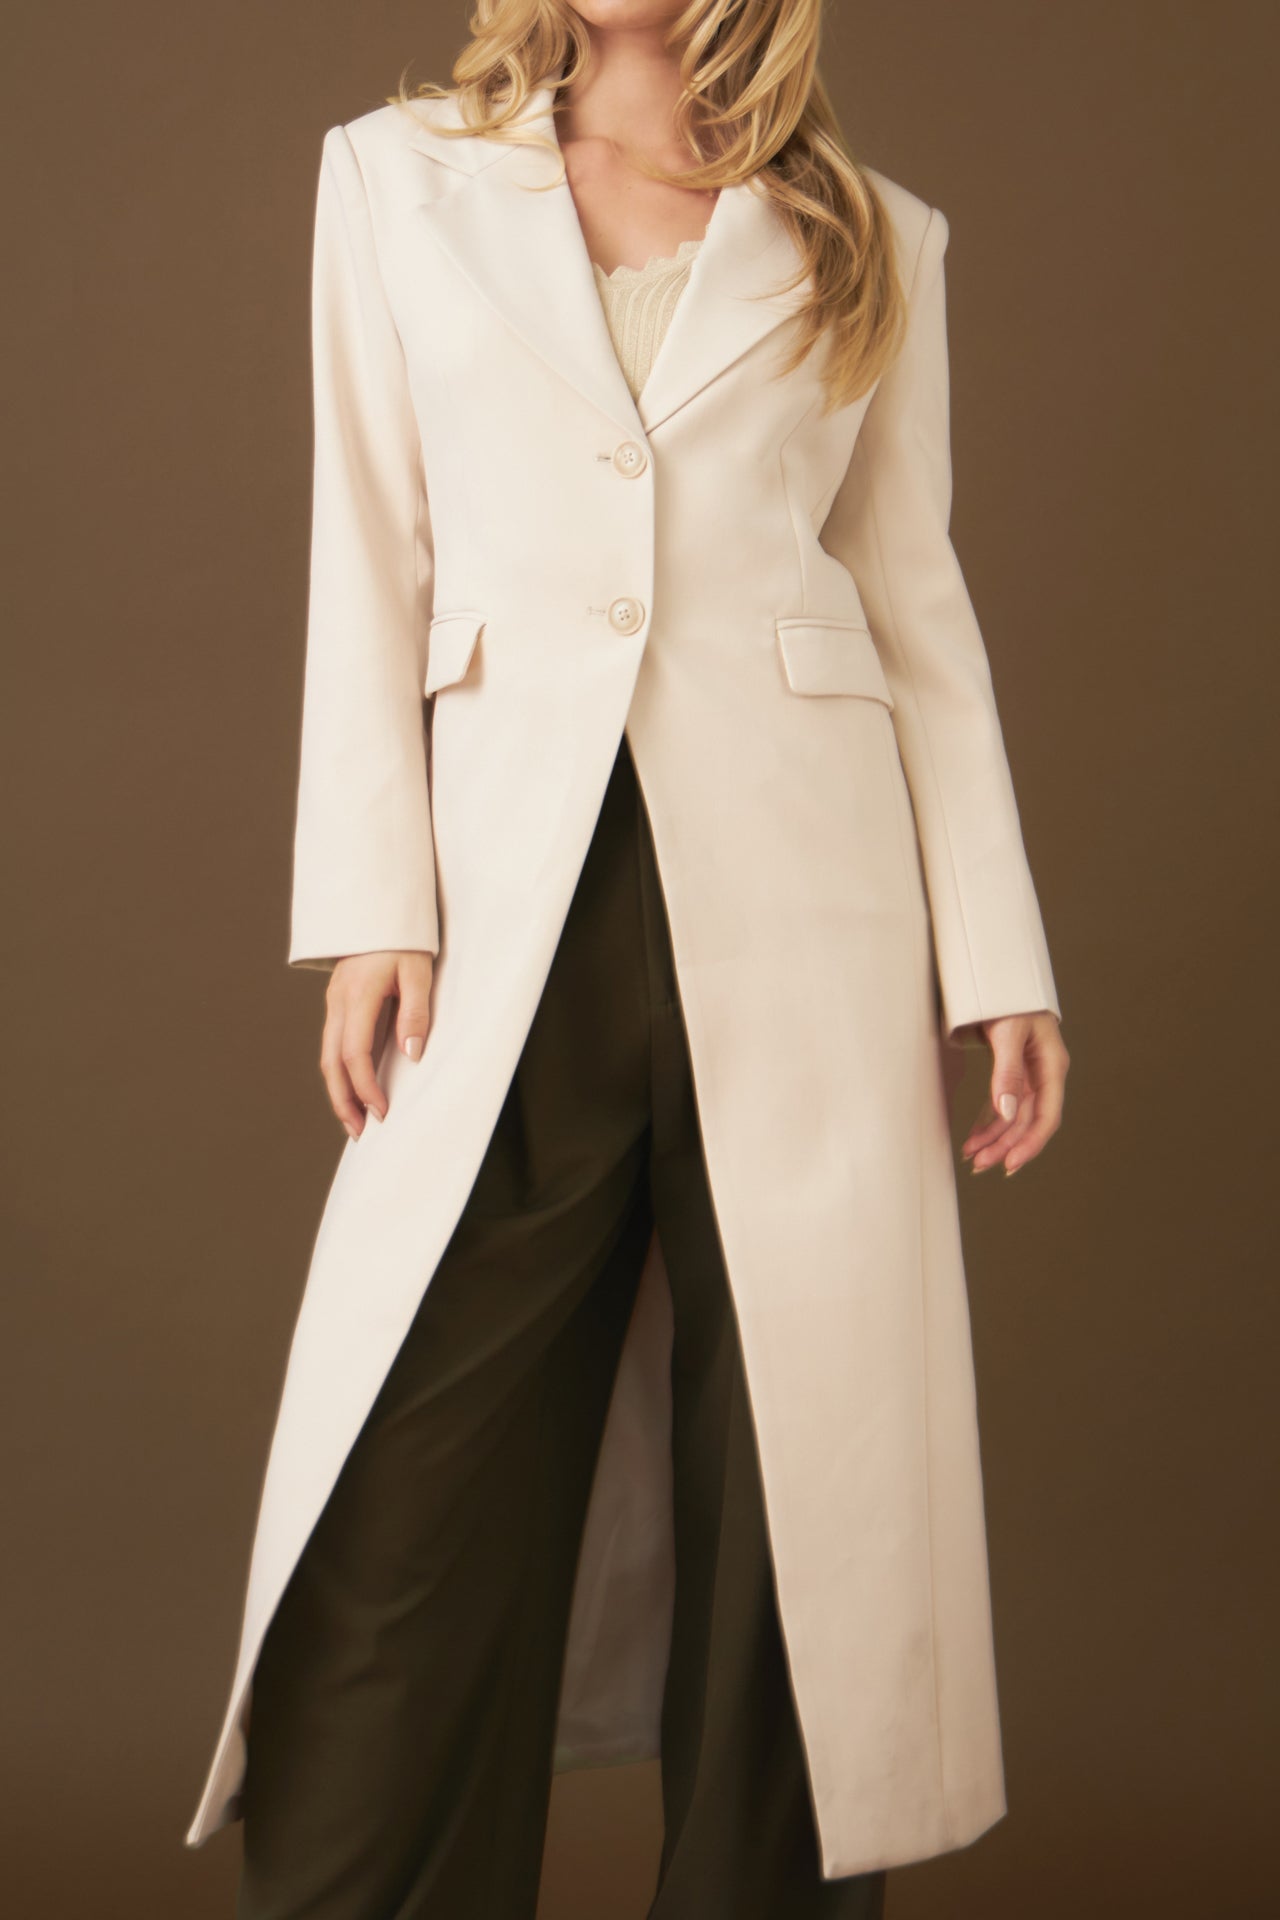 Endless Rose - Front Slit Long Jacket - Coats in Women's Clothing available at endlessrose.com